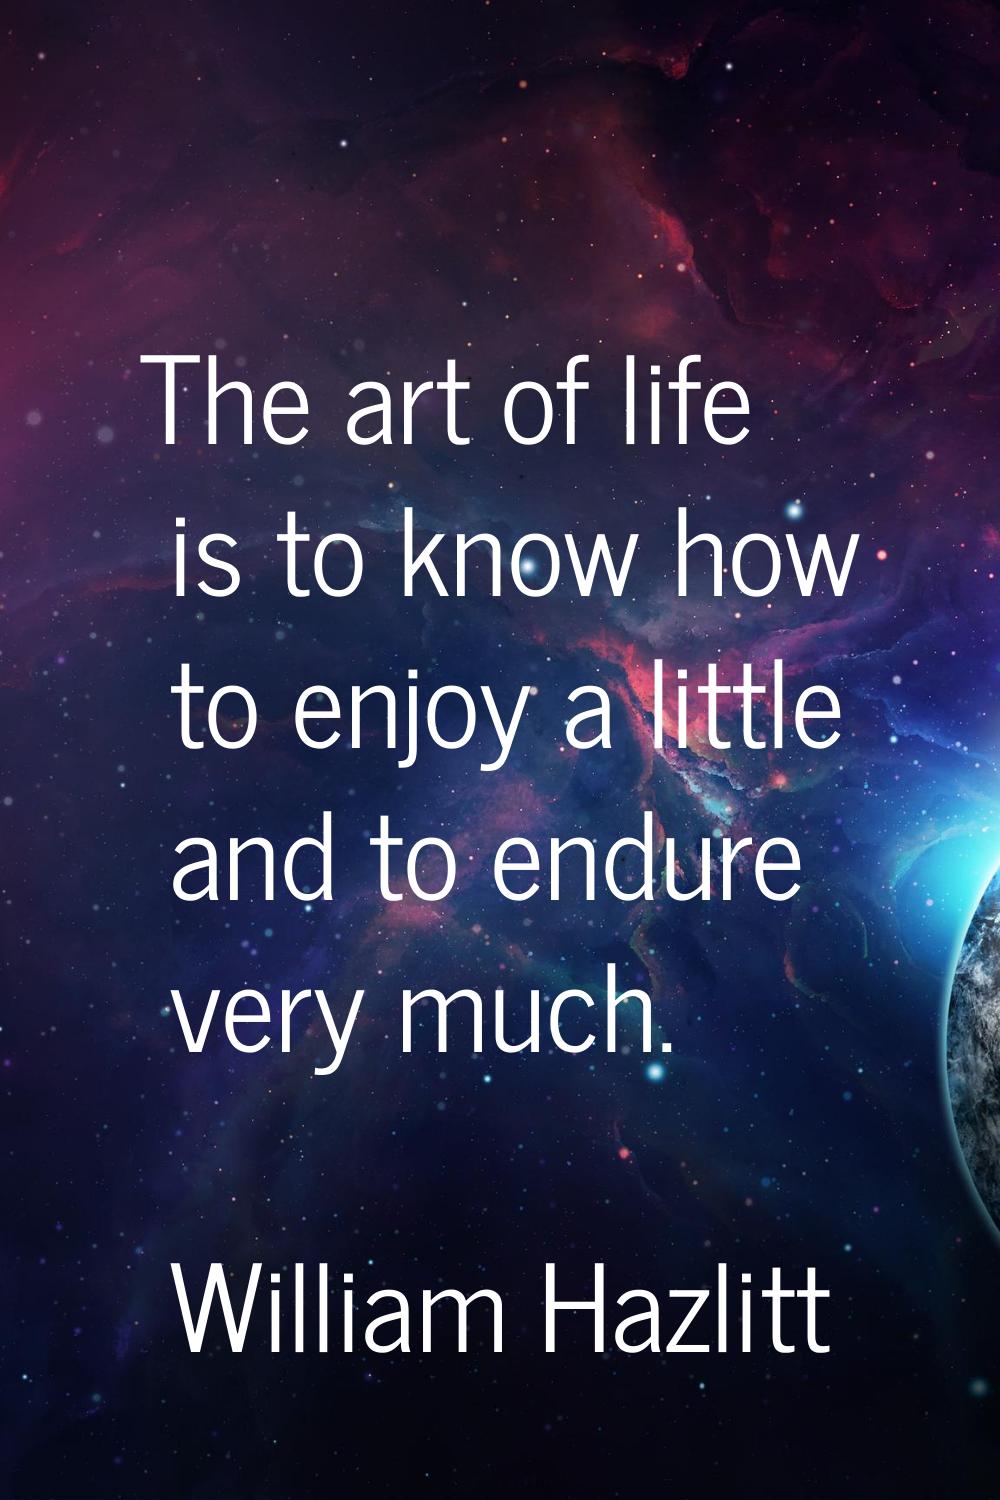 The art of life is to know how to enjoy a little and to endure very much.